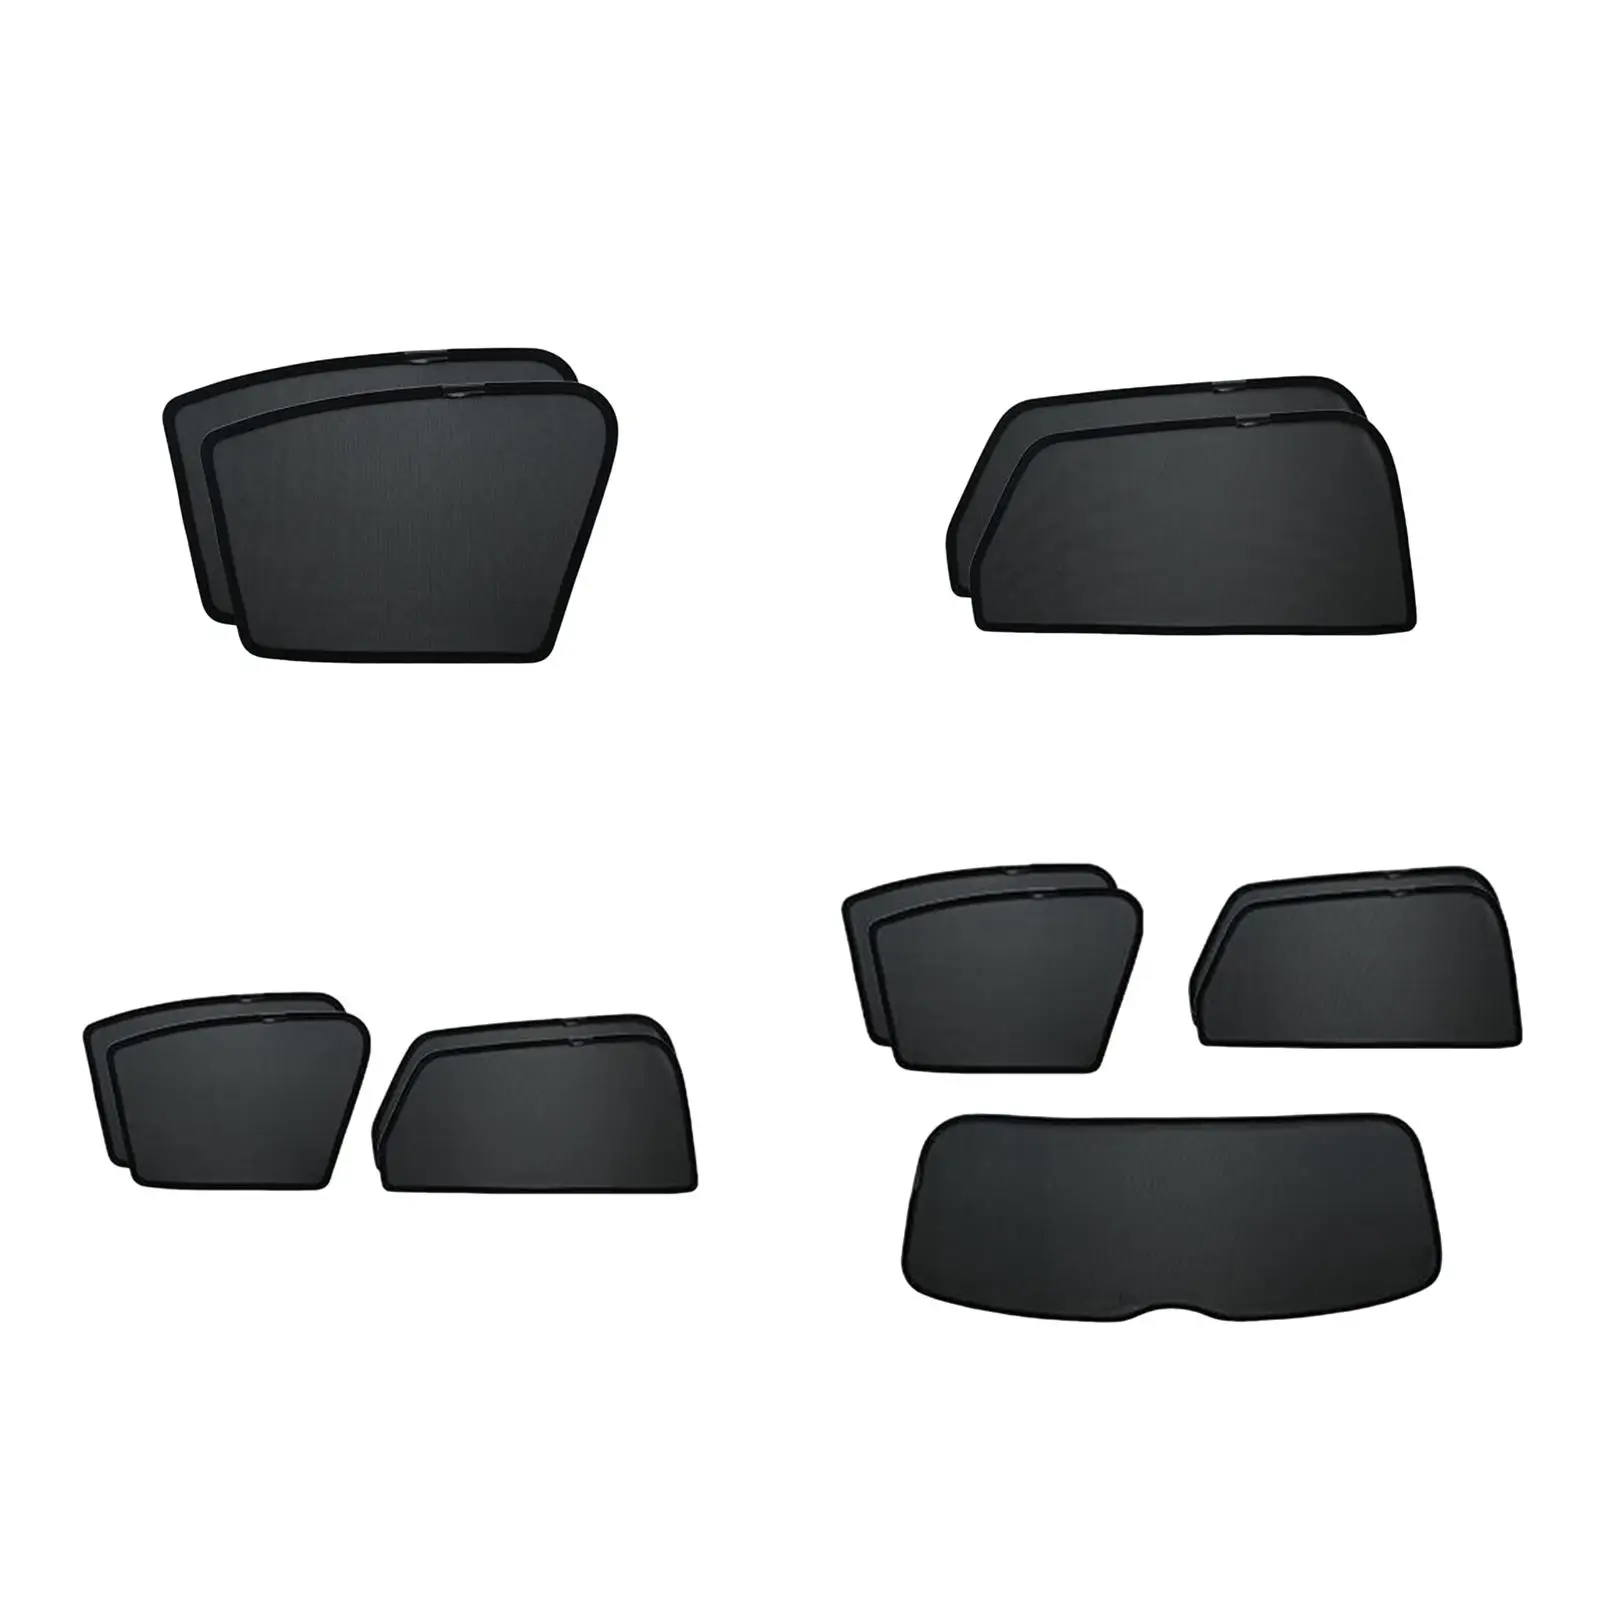 

Car Window Sun Shades Protection Easy to Install Accessory Keeps Vehicle Cool Window Sunshades for Byd Atto 3 Yuan Plus